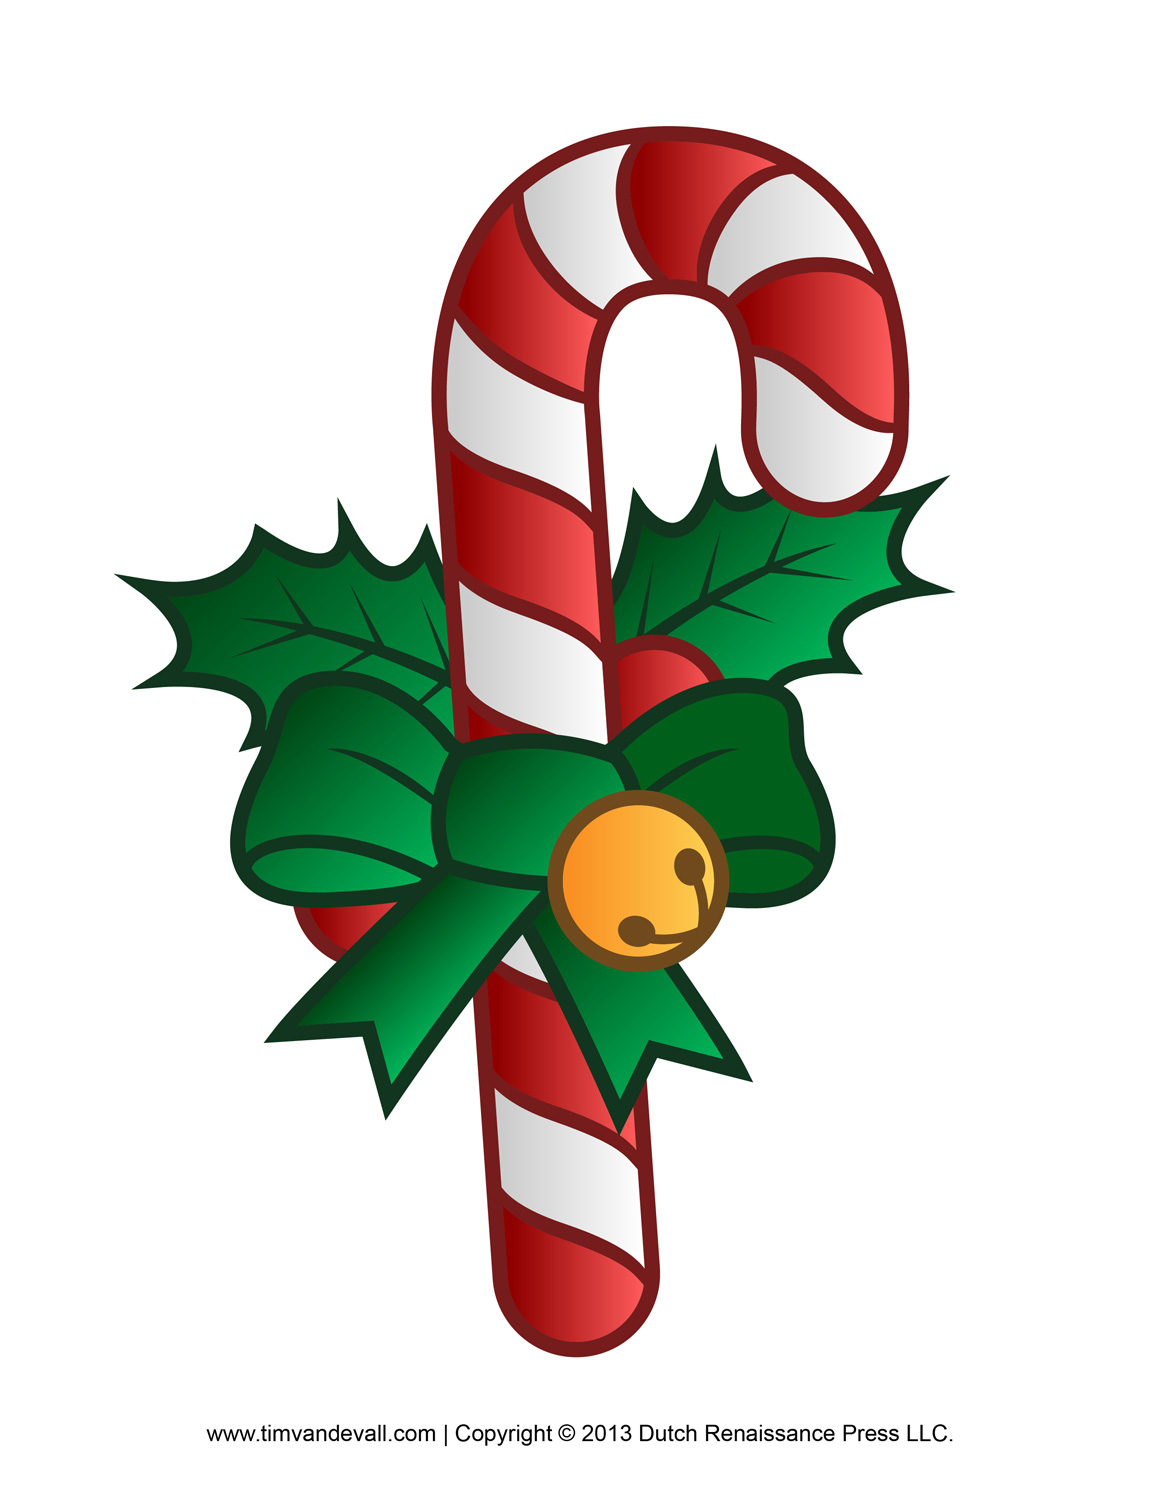 Candy cane scraps on candy canes vintage christmas clip art 2 2 ...